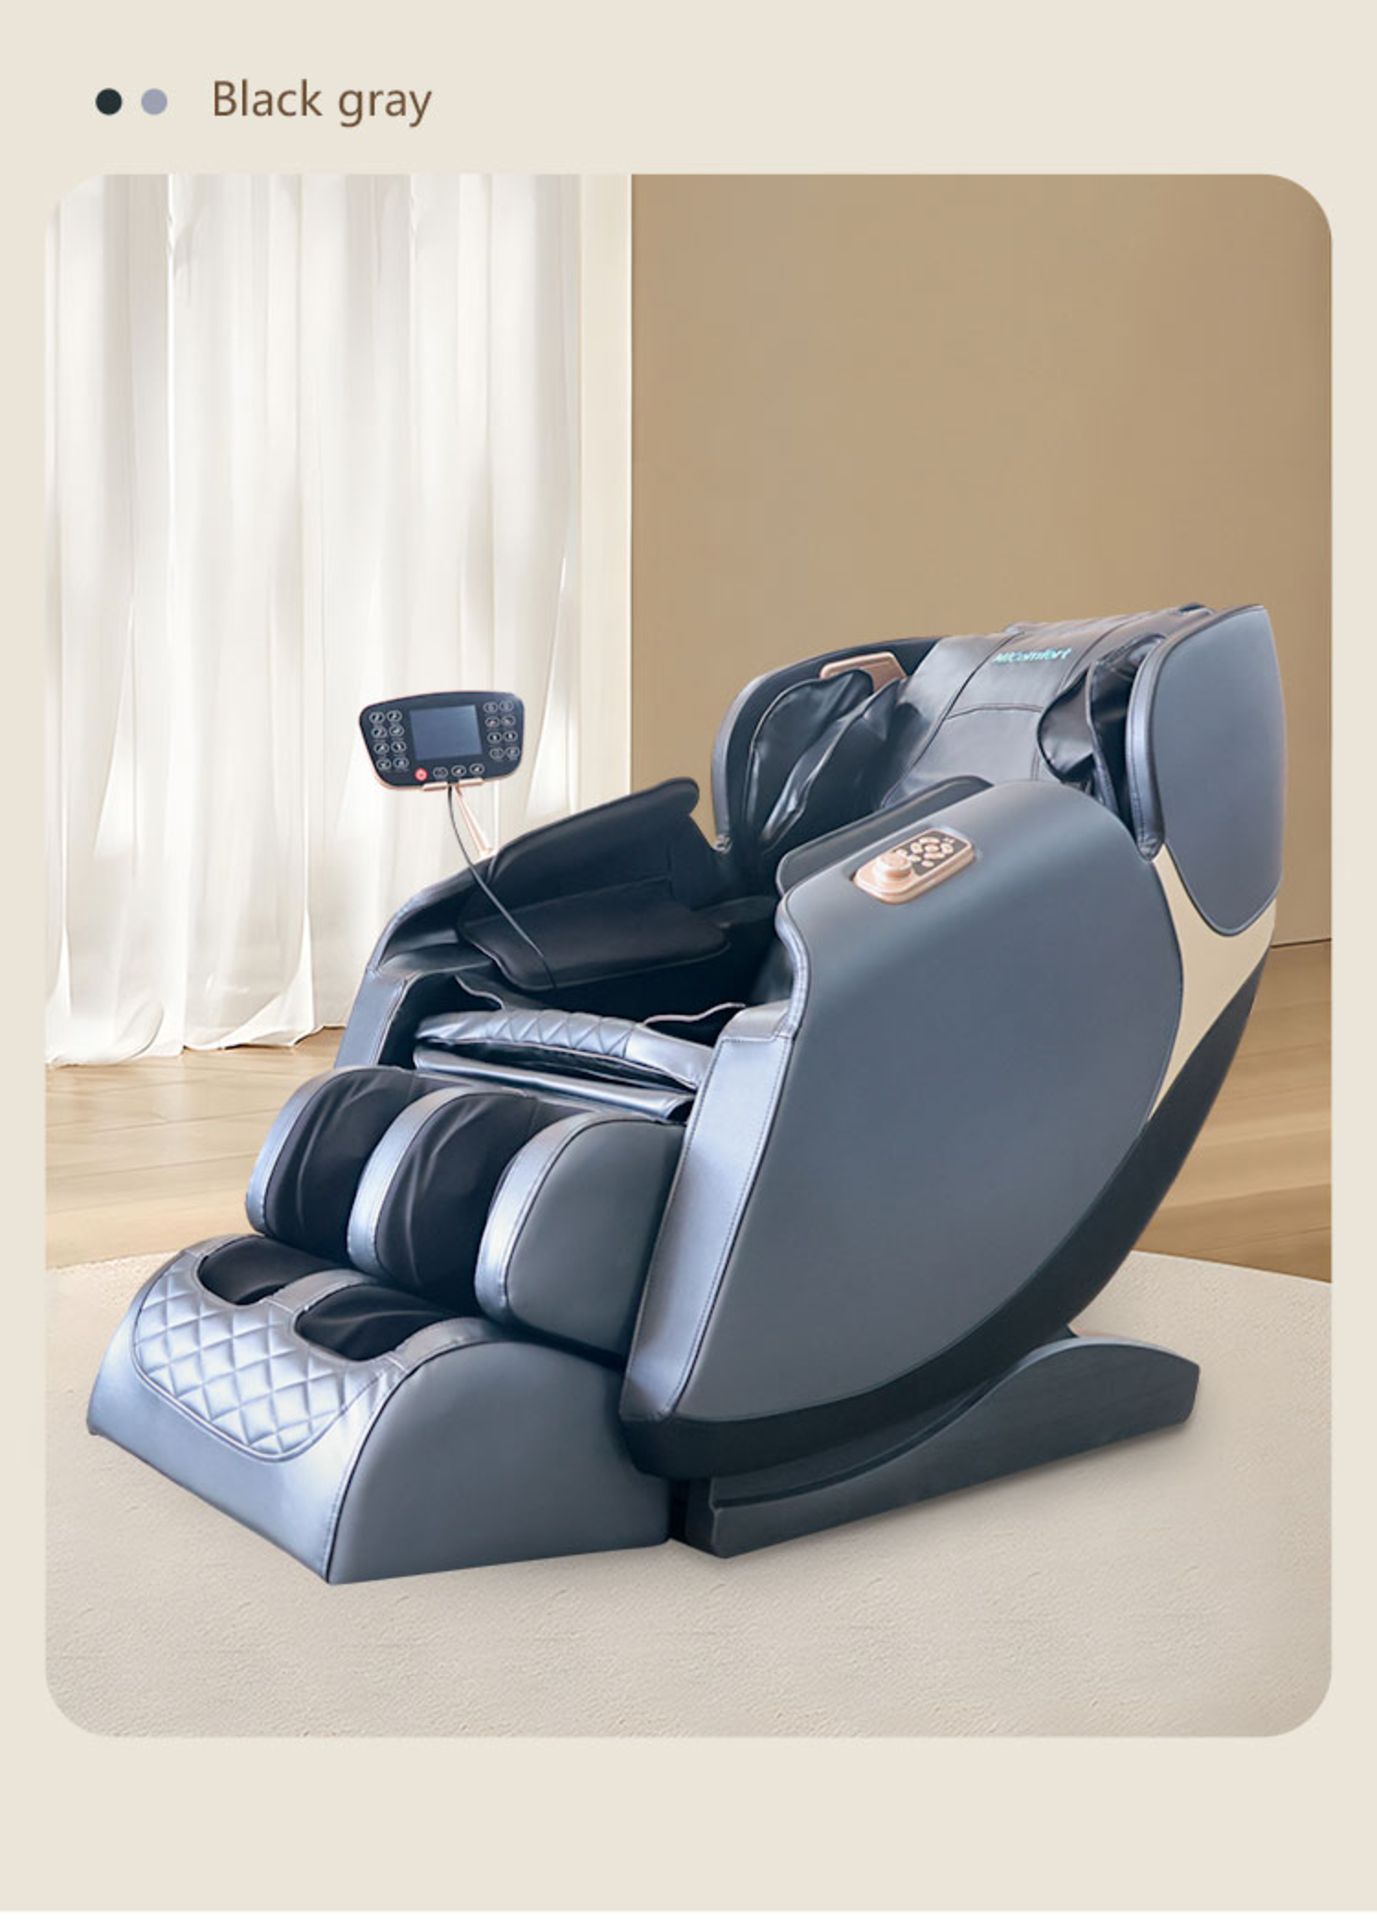 Brand New in Box Orchid Blue/Black MiComfort Full Body Massage Chair RRP £2199 *NO VAT* - Image 11 of 14